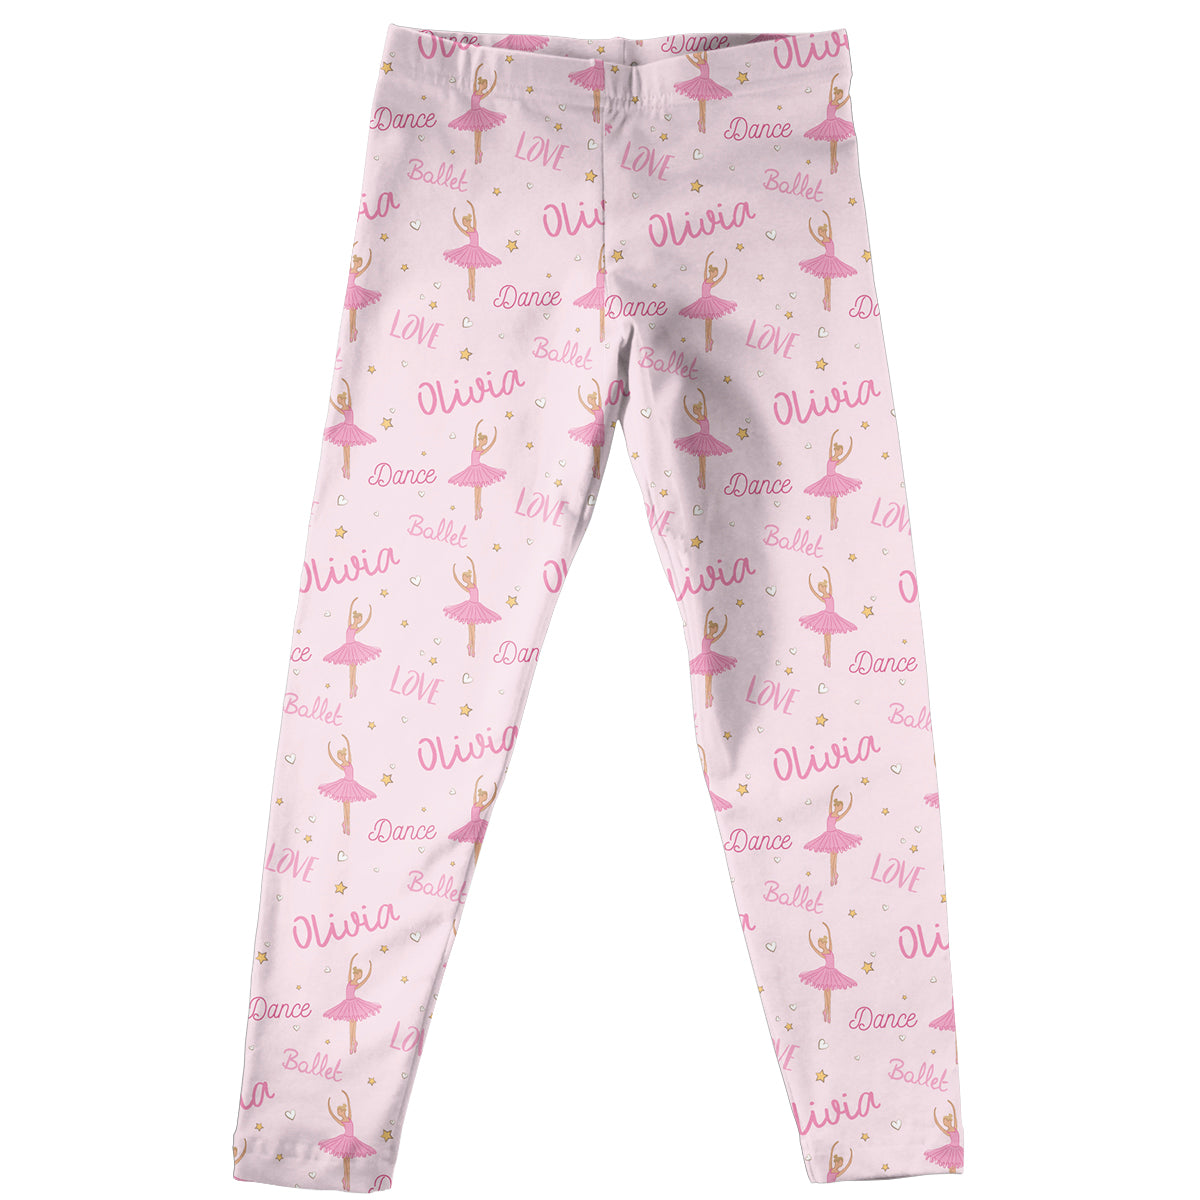 Ballerina and Name Print Pink Leggings - Wimziy&Co.